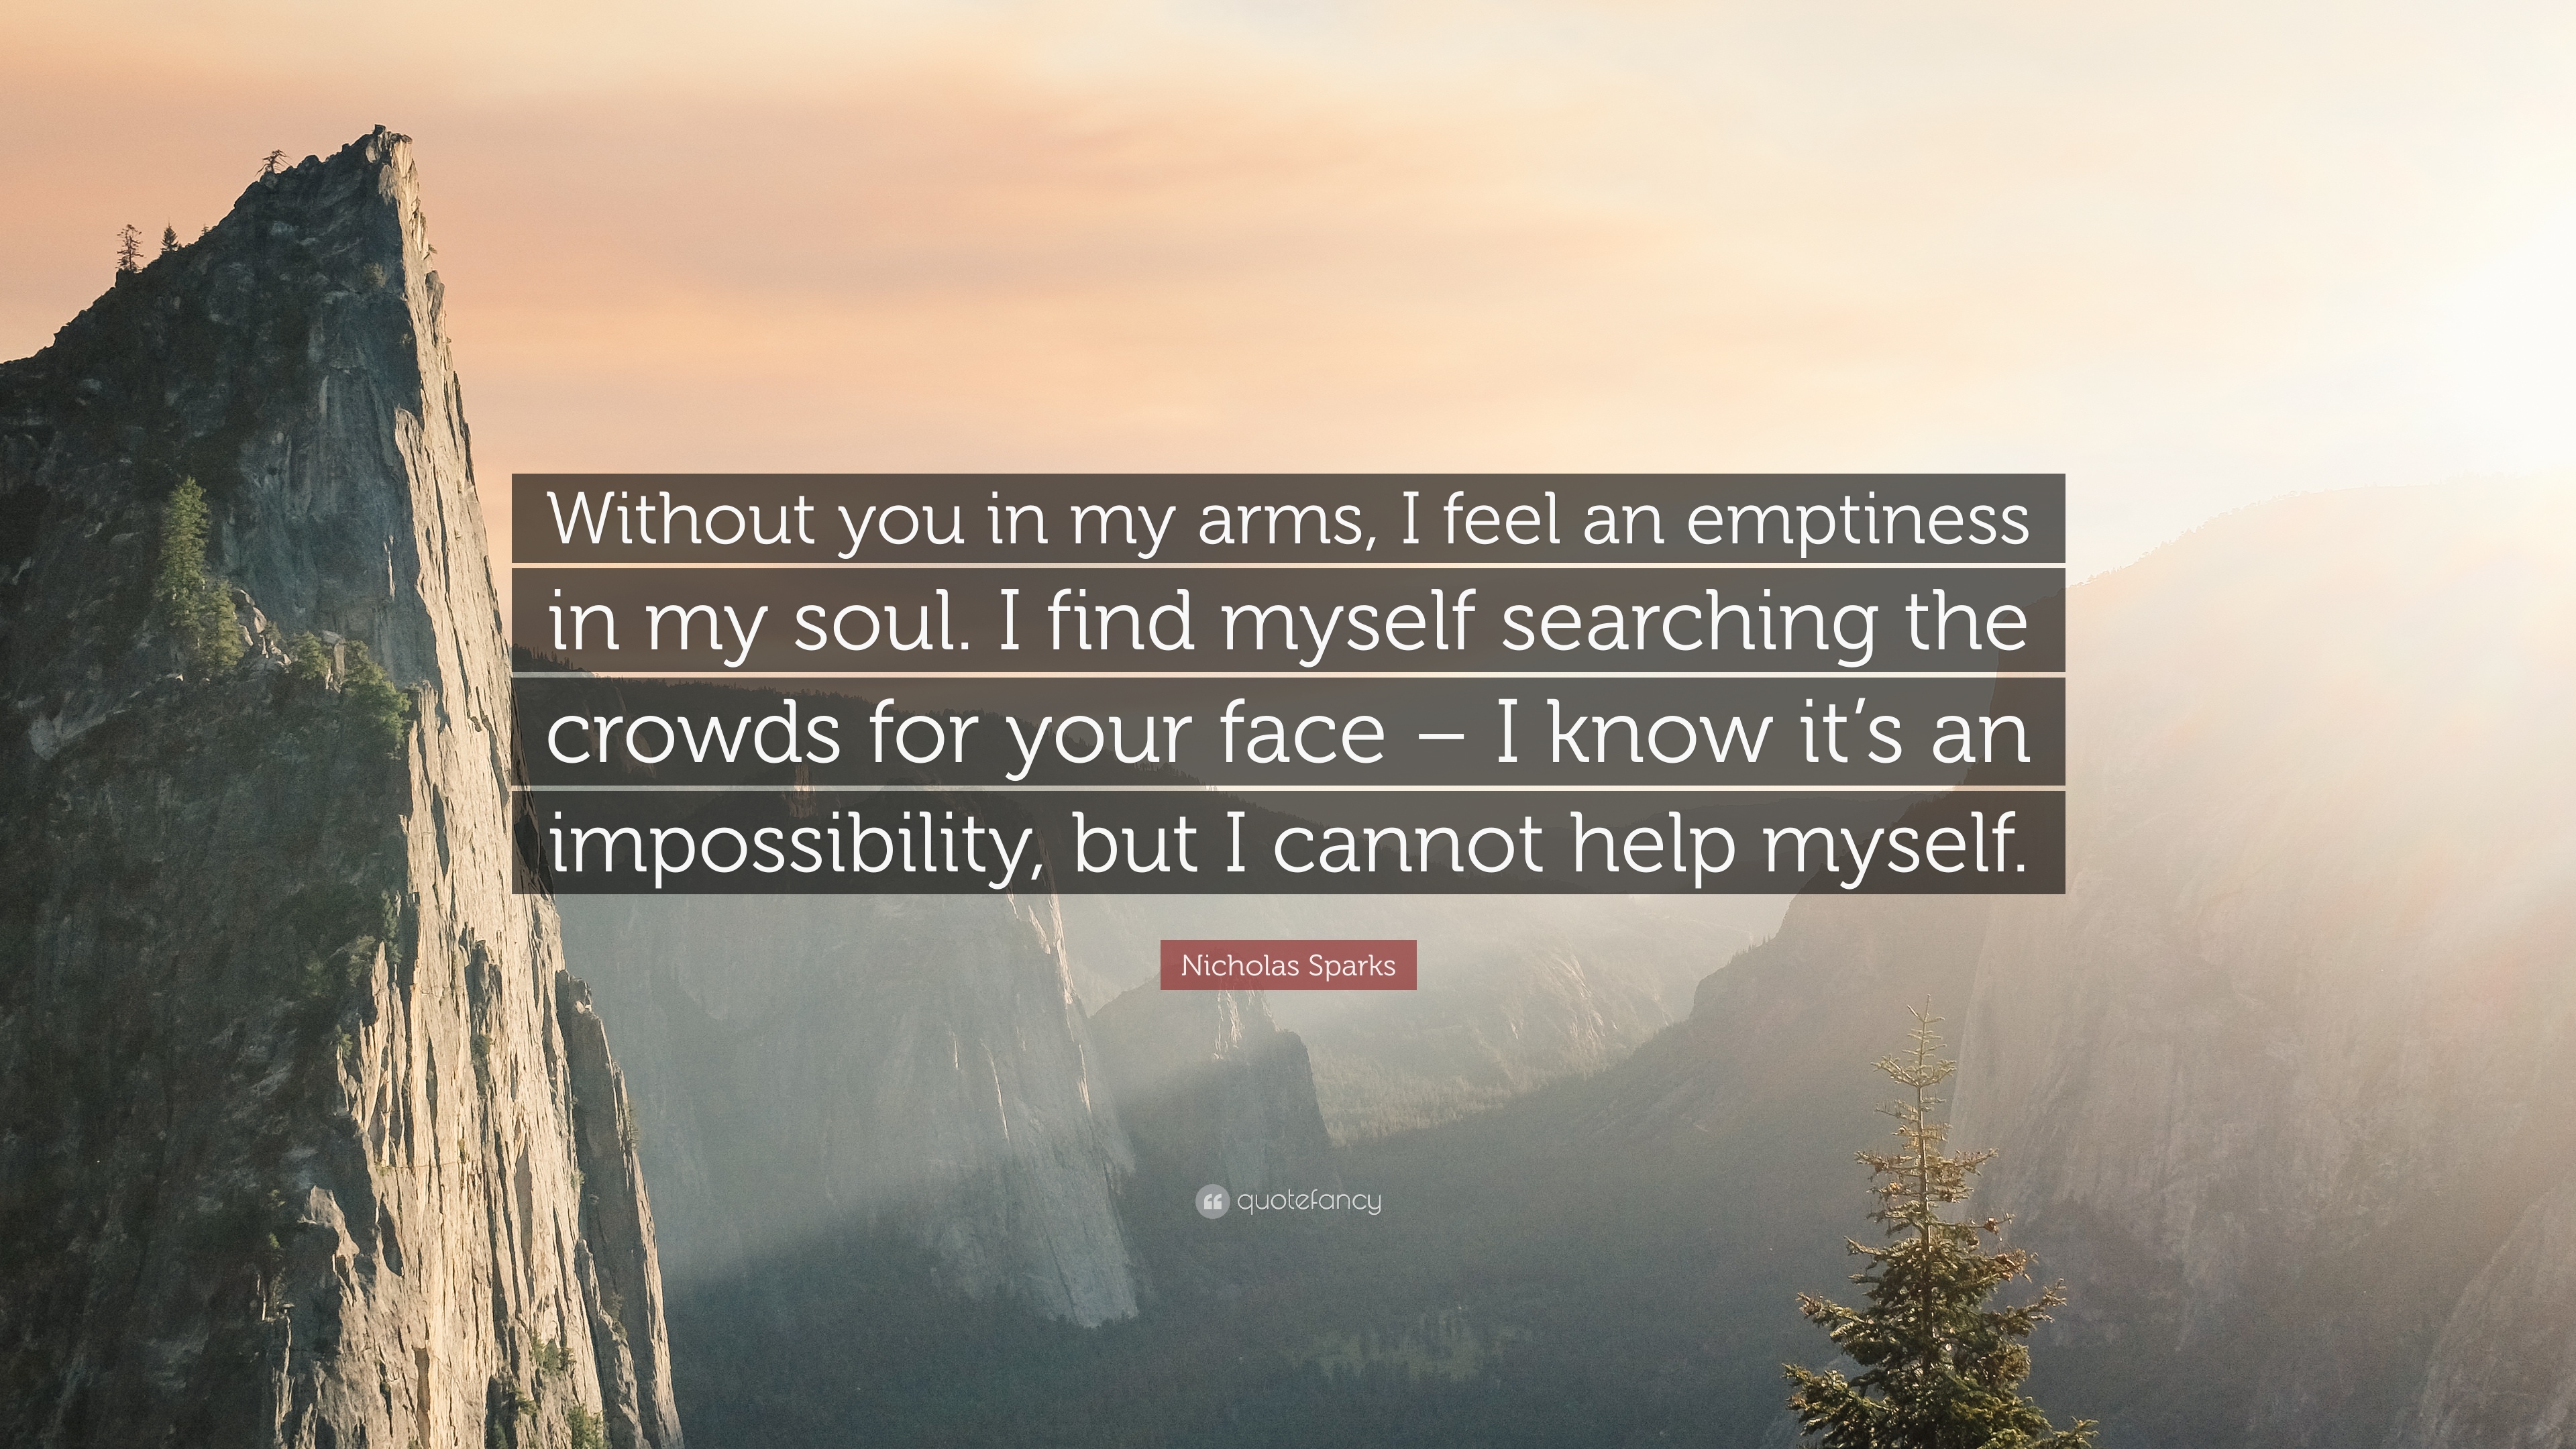 Nicholas Sparks Quote: “Without you in my arms, I feel an emptiness ...